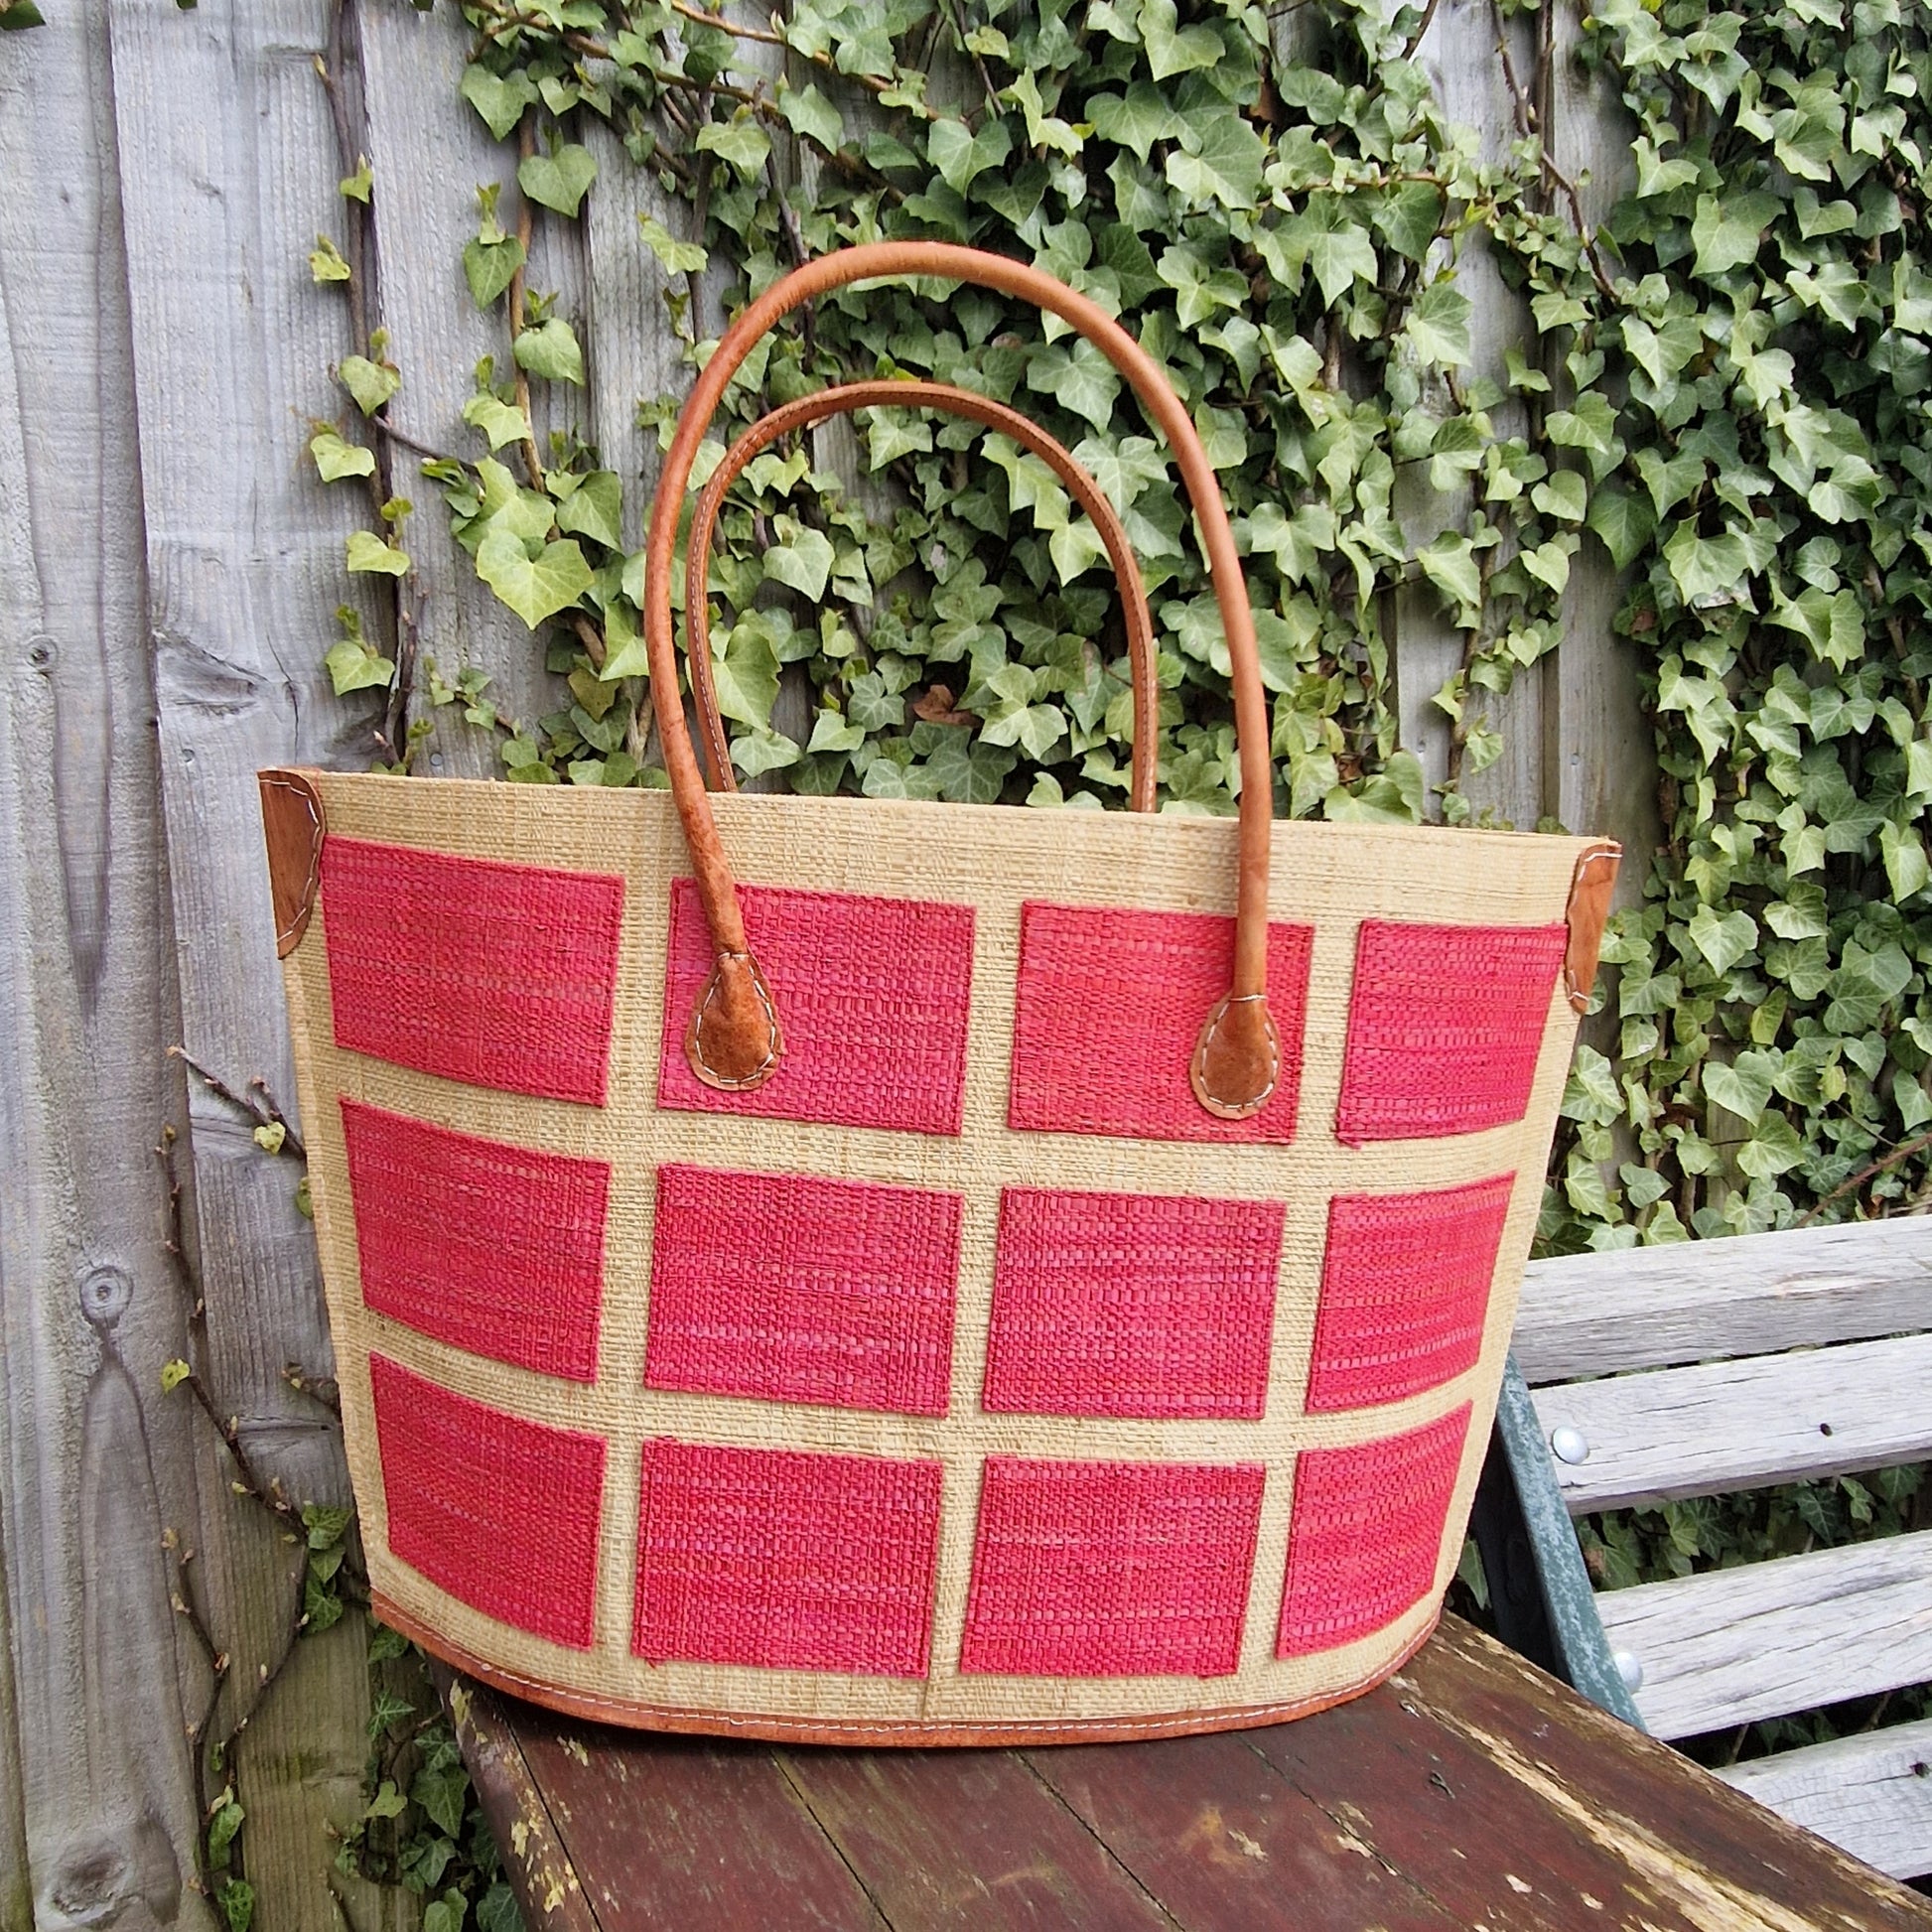 Bato style raffia basket decorated with strawberry red coloured squares.